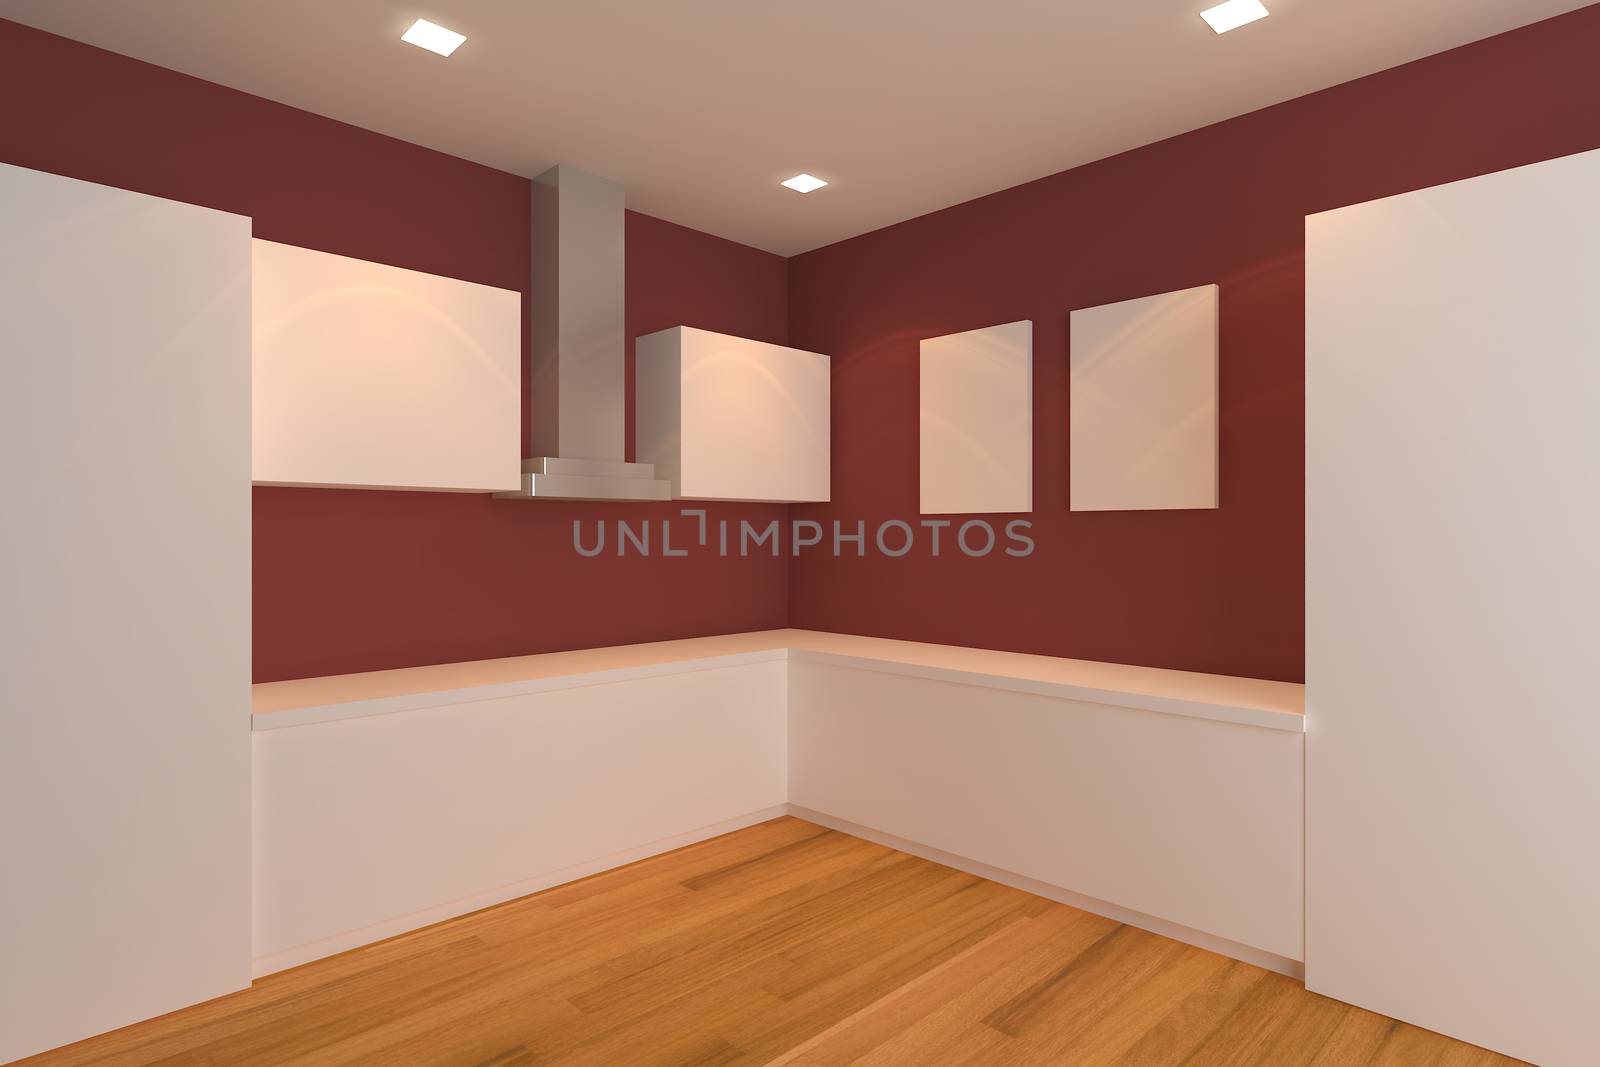 empty interior design for kitchen room with red wall.